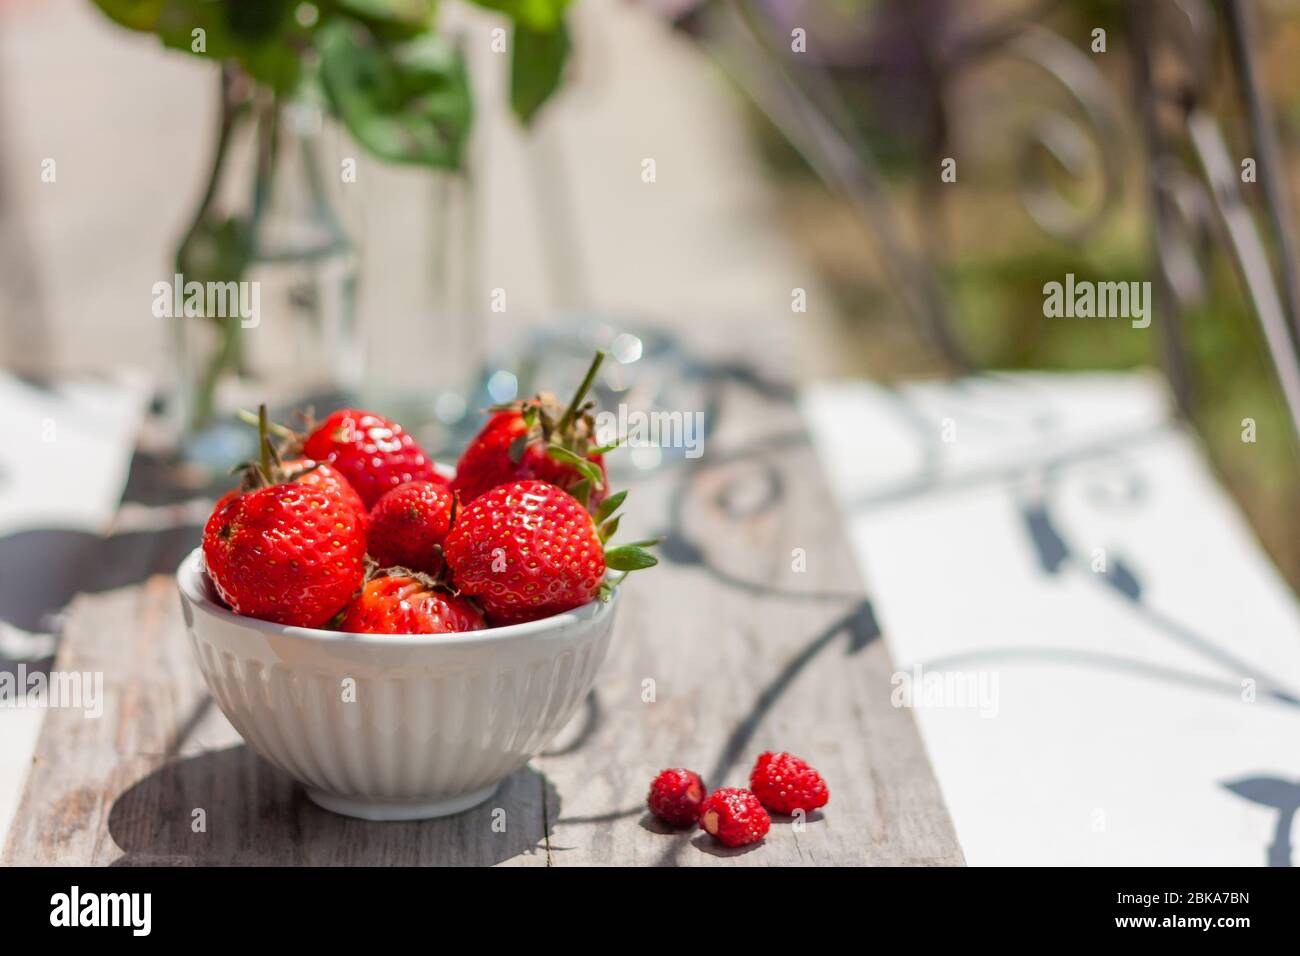 Fruit bowl full of fresh, red, jucy strawberries on wooden table. Decoration with a floral arrangement. space for text Stock Photo